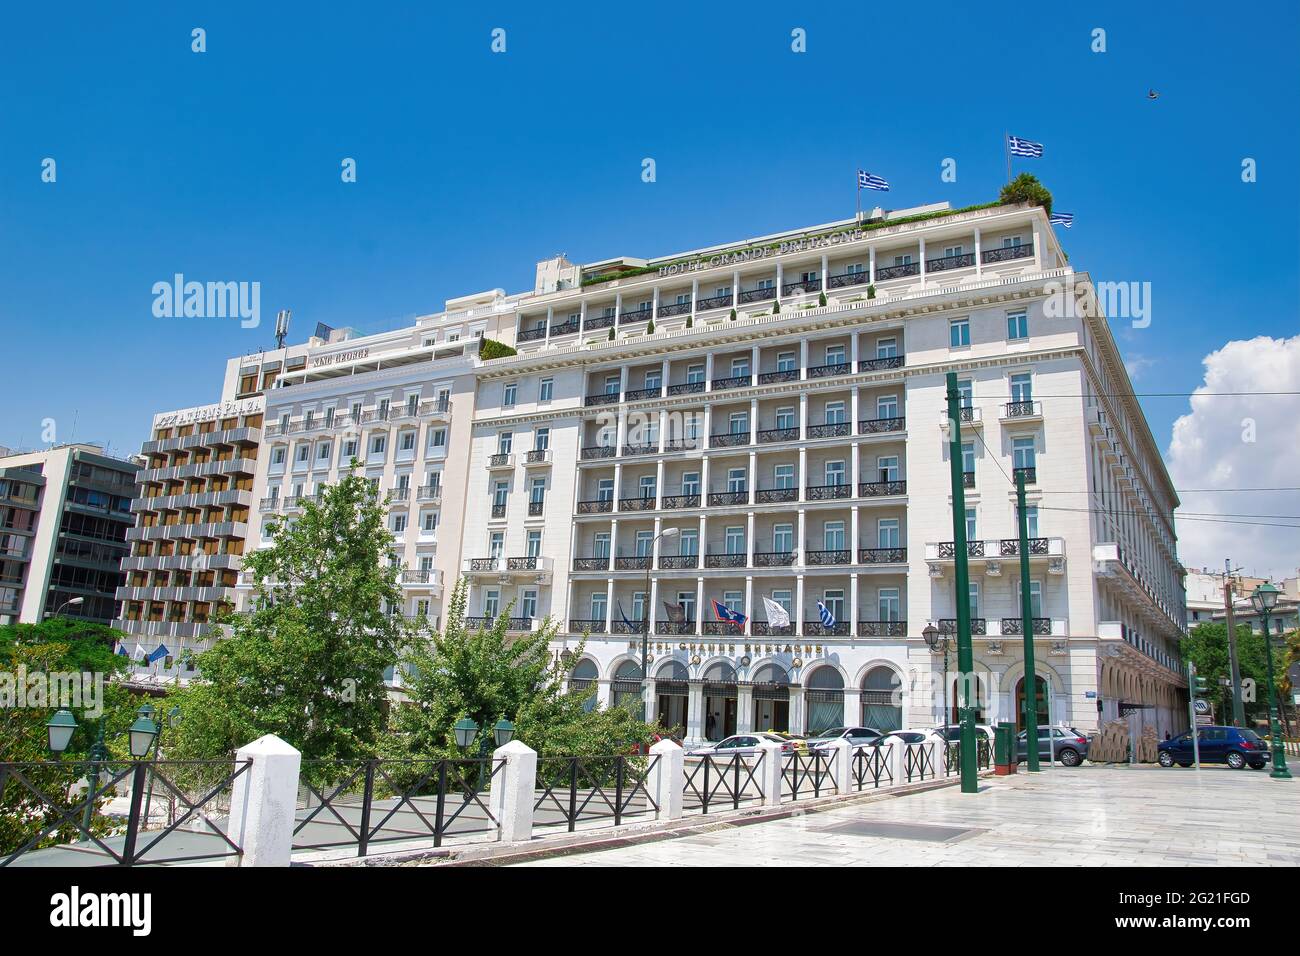 ATHENS, GREECE - May 29, 2021: The historic Grande Bretagne hotel at Syntagma square in Athens on a sunny morning Stock Photo